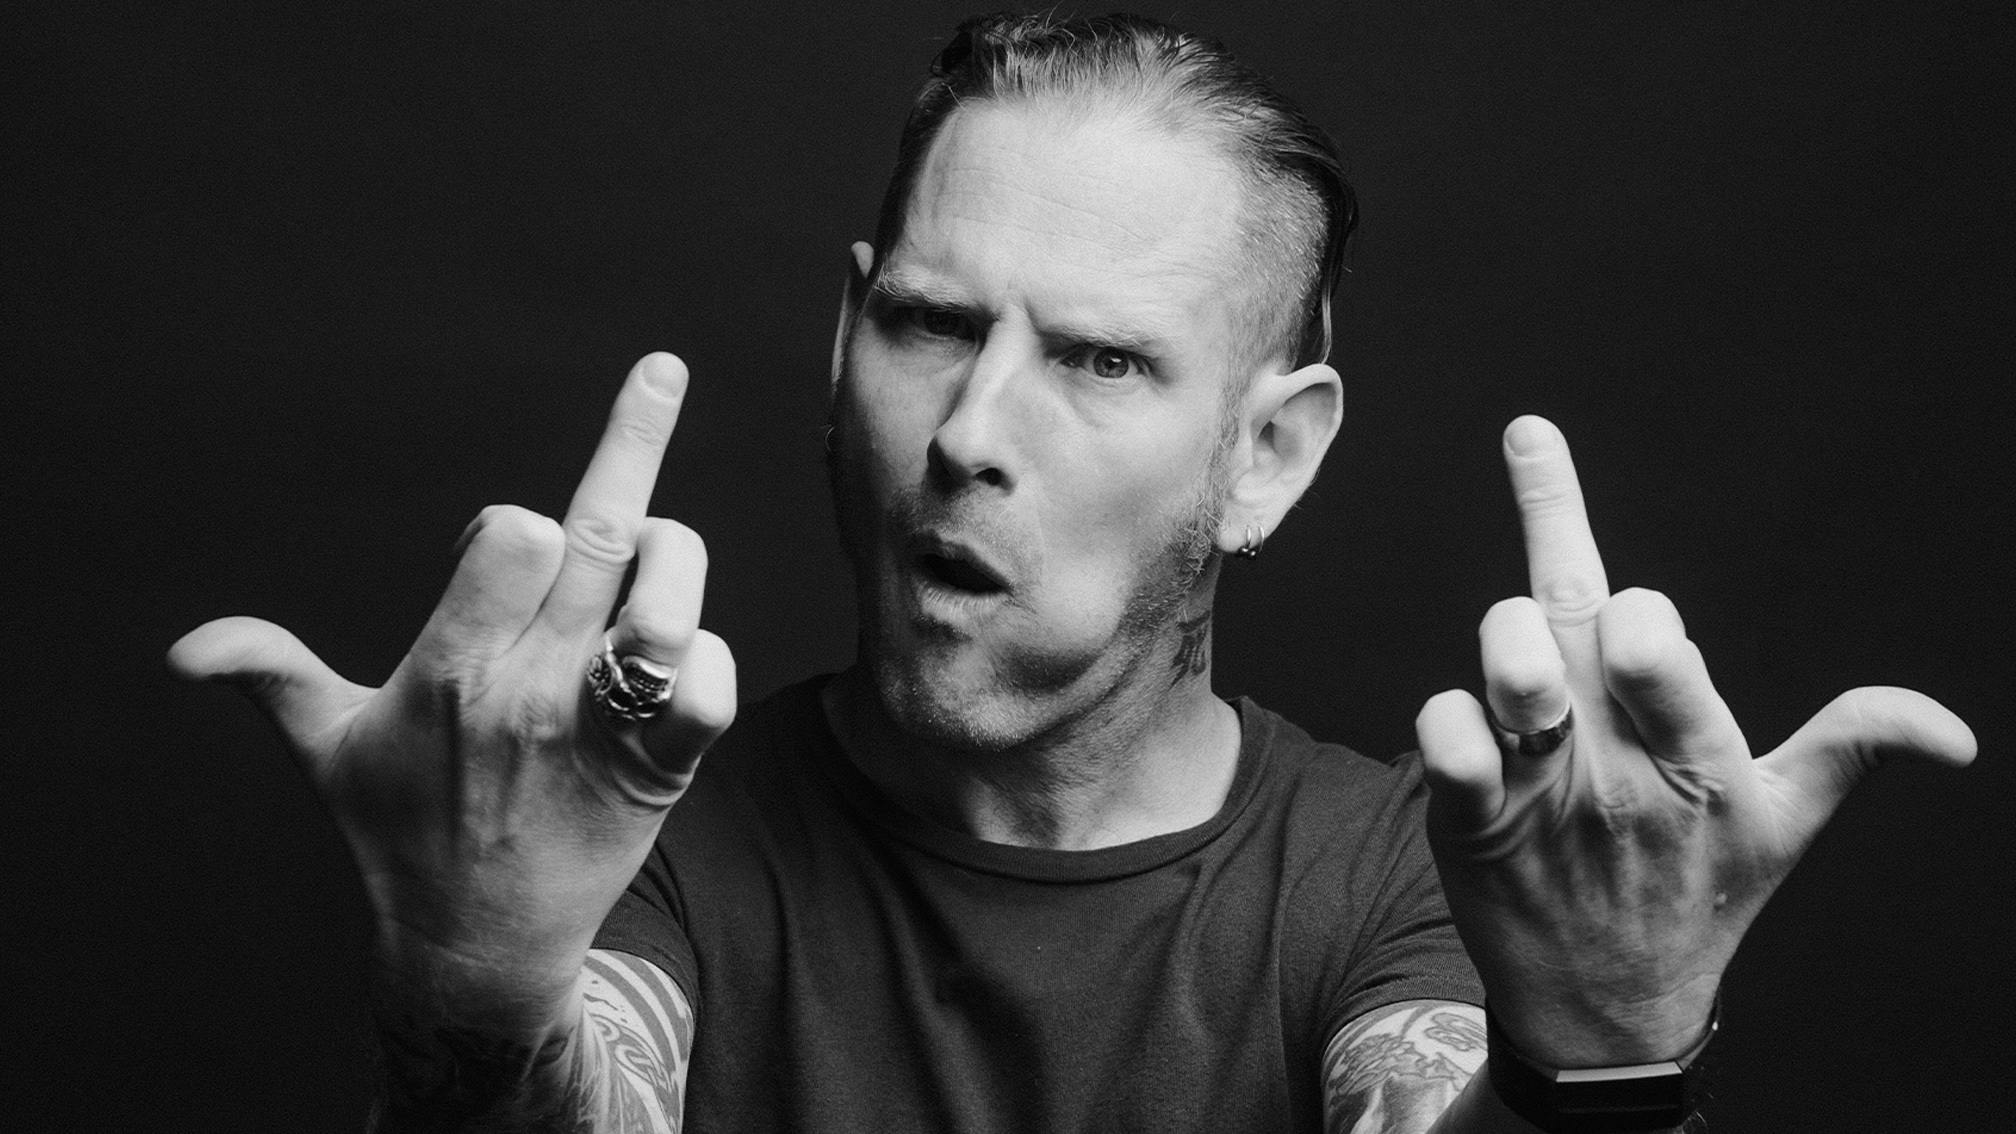 Corey Taylor: “My reasons for making music have never changed”